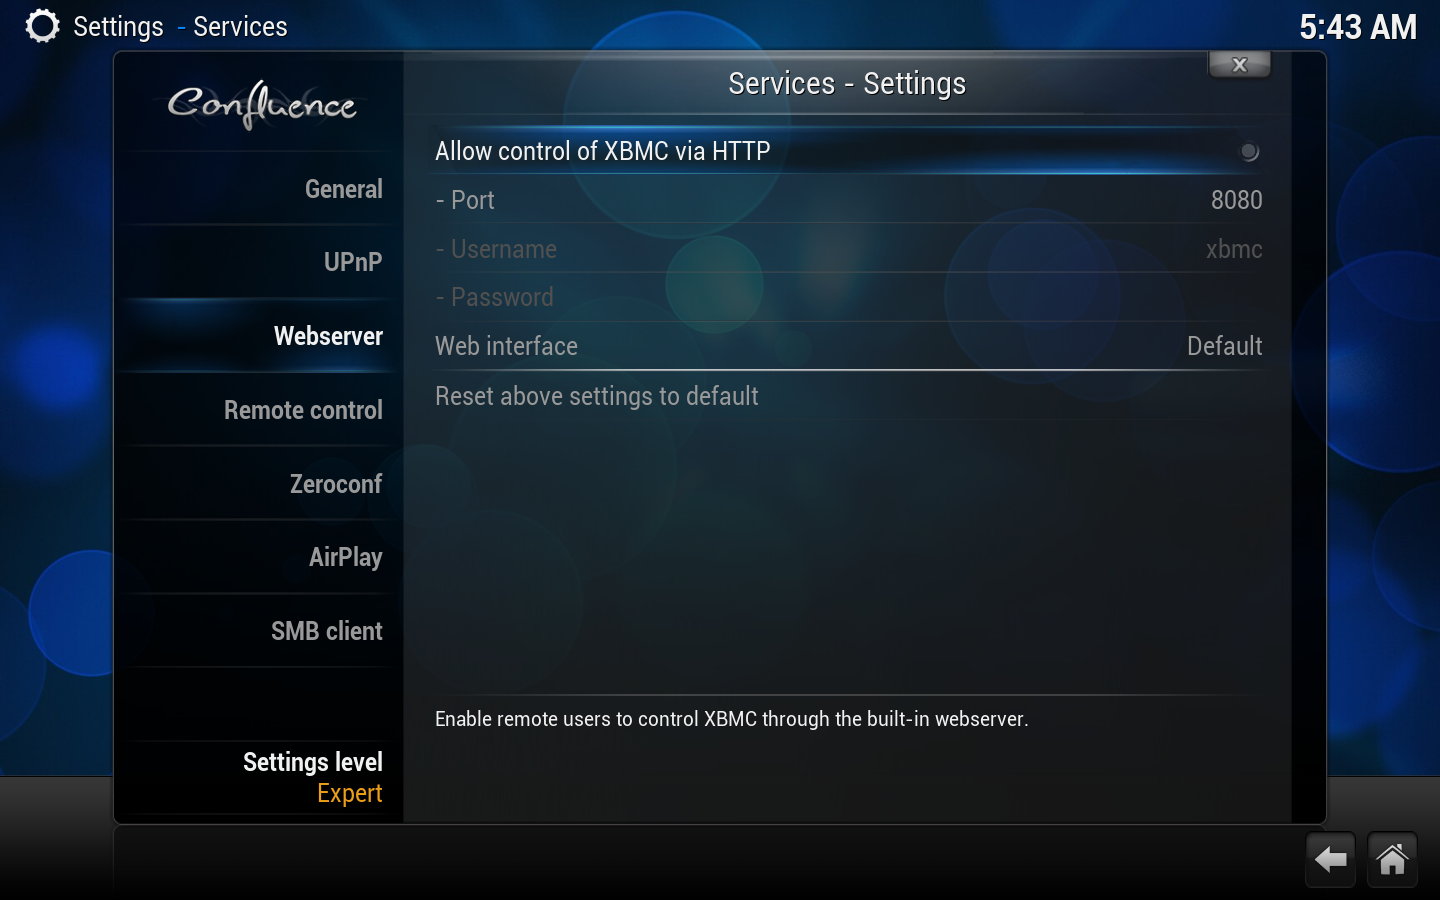 File:Settings.services.webserver.png